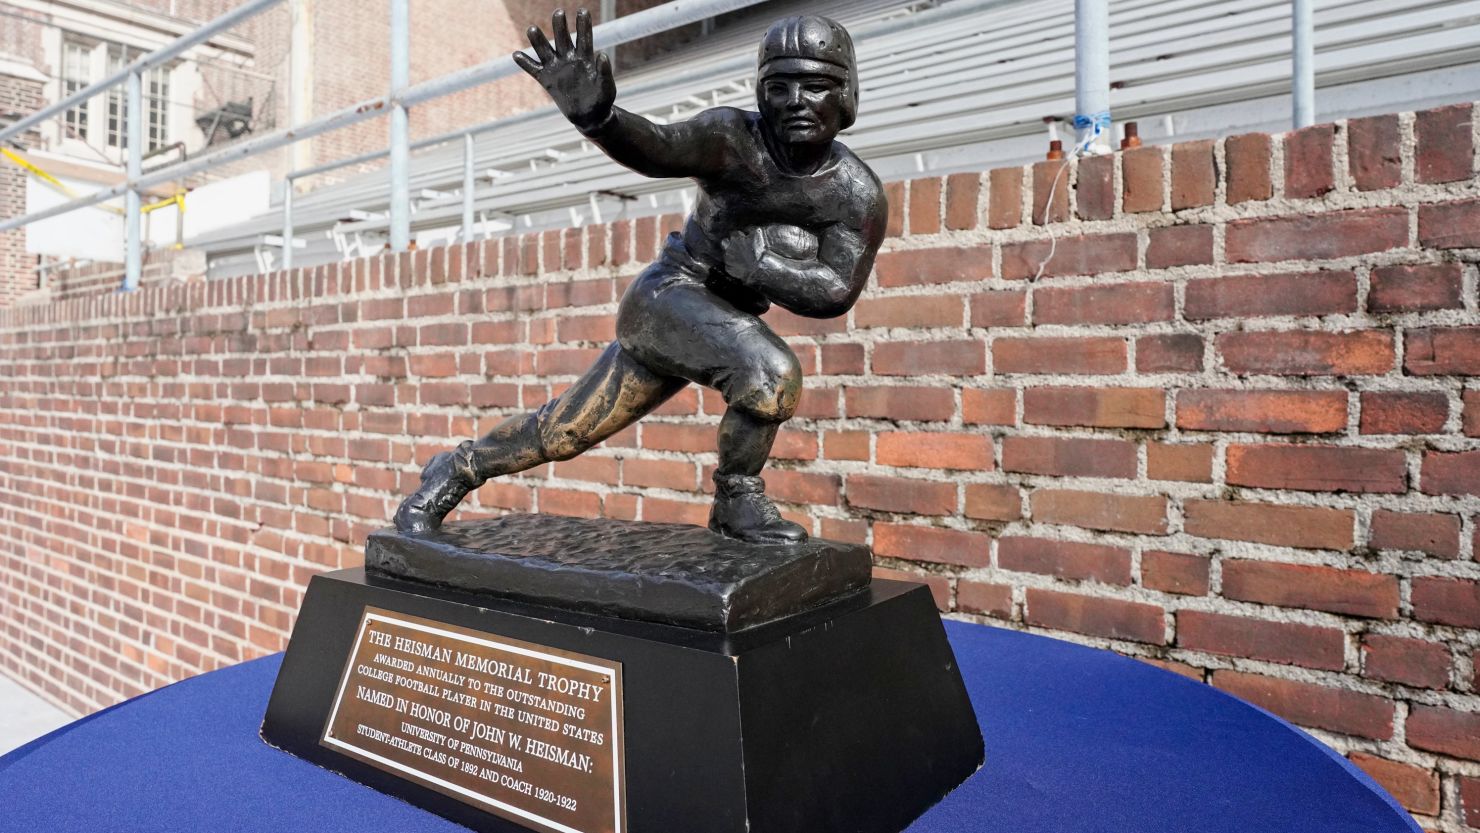 The Heisman Trophy is awarded annually to college football's most outstanding player.